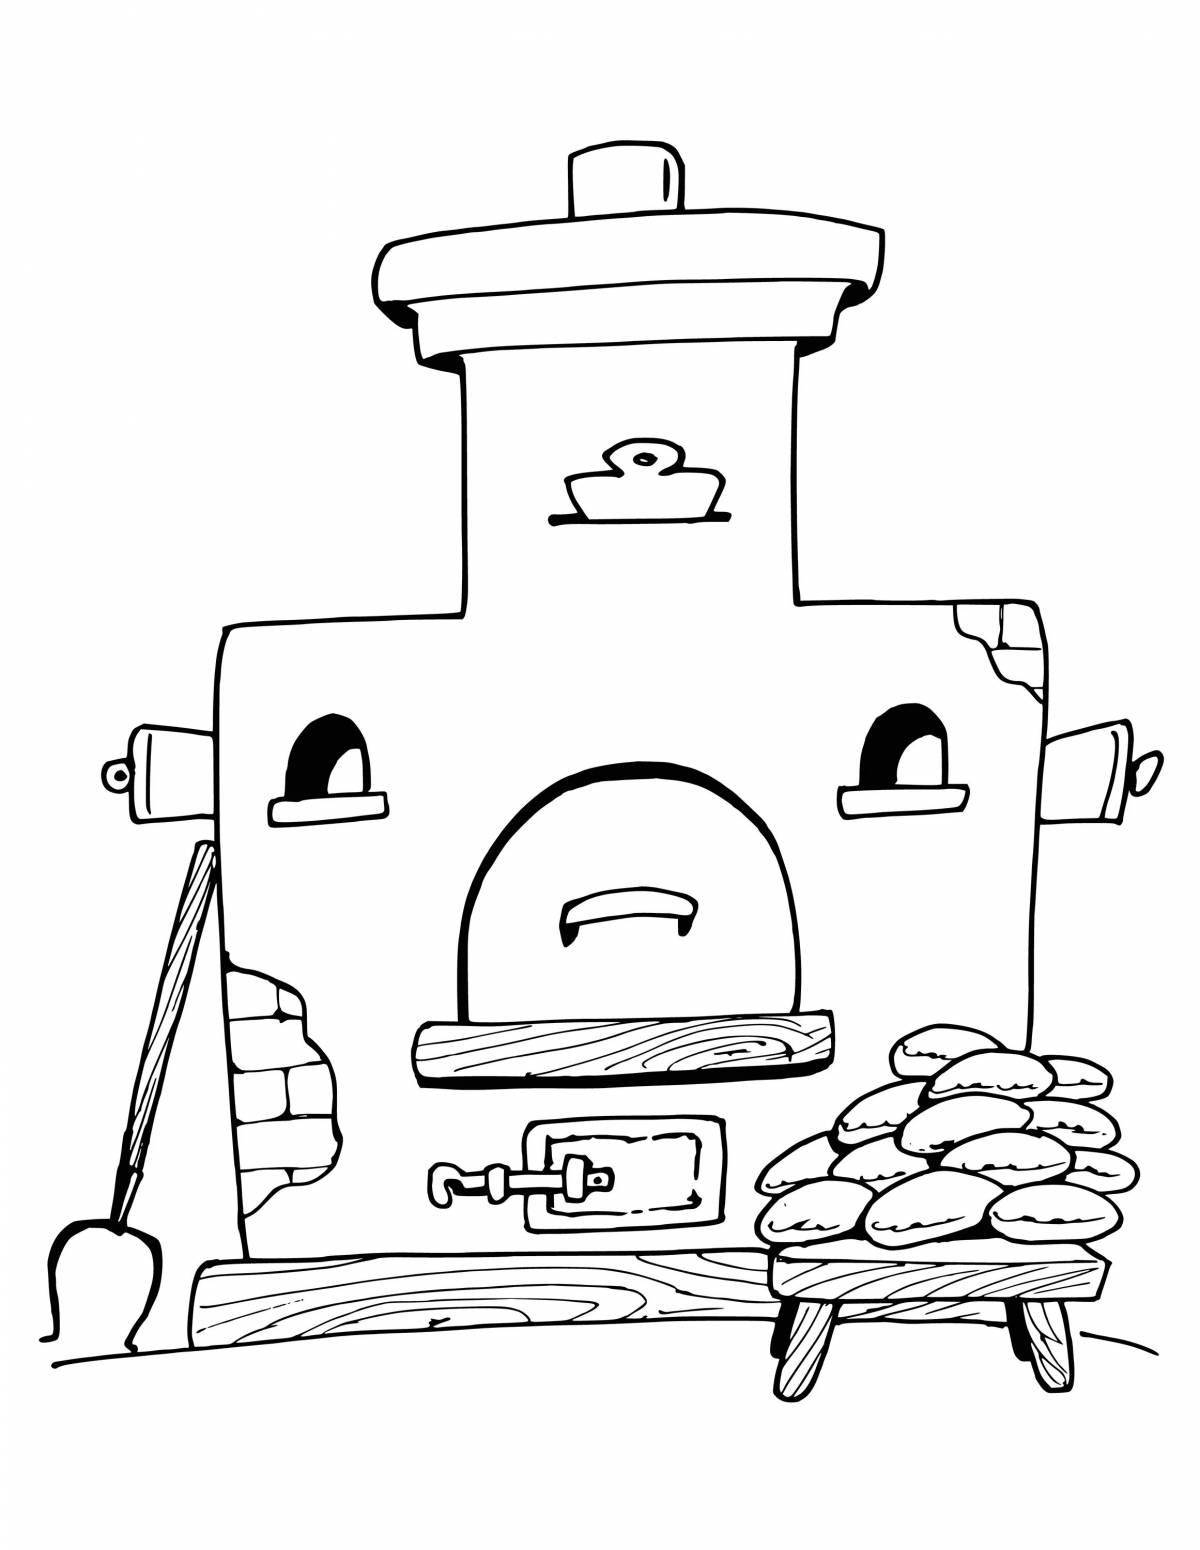 Bold Russian oven coloring pages for kids